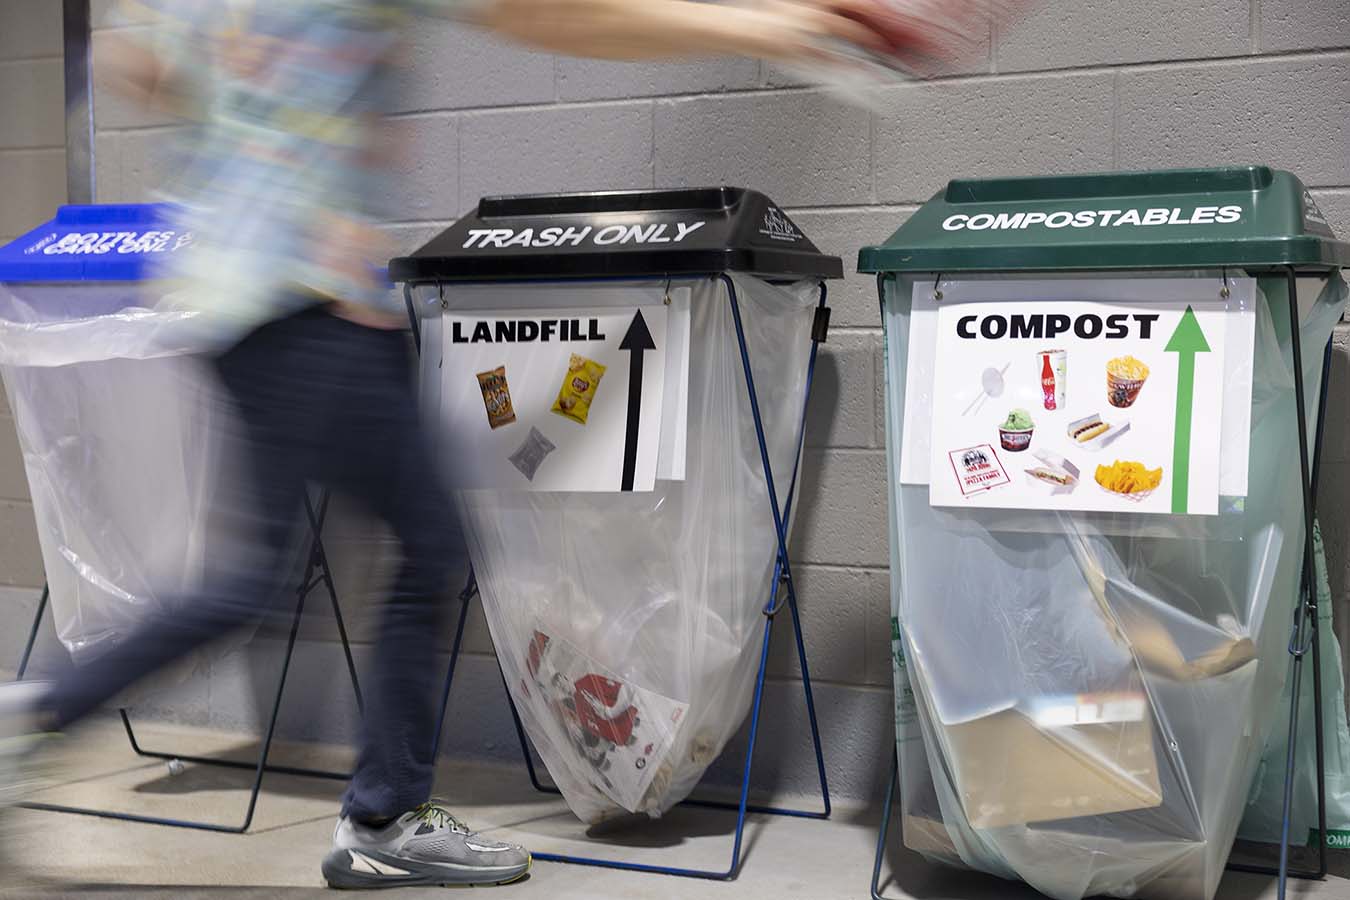 Fans dispose of trash in organized bins at Foley Field during a zero waste initiative in 2023. (Photo by Chamberlain Smith/UGA)